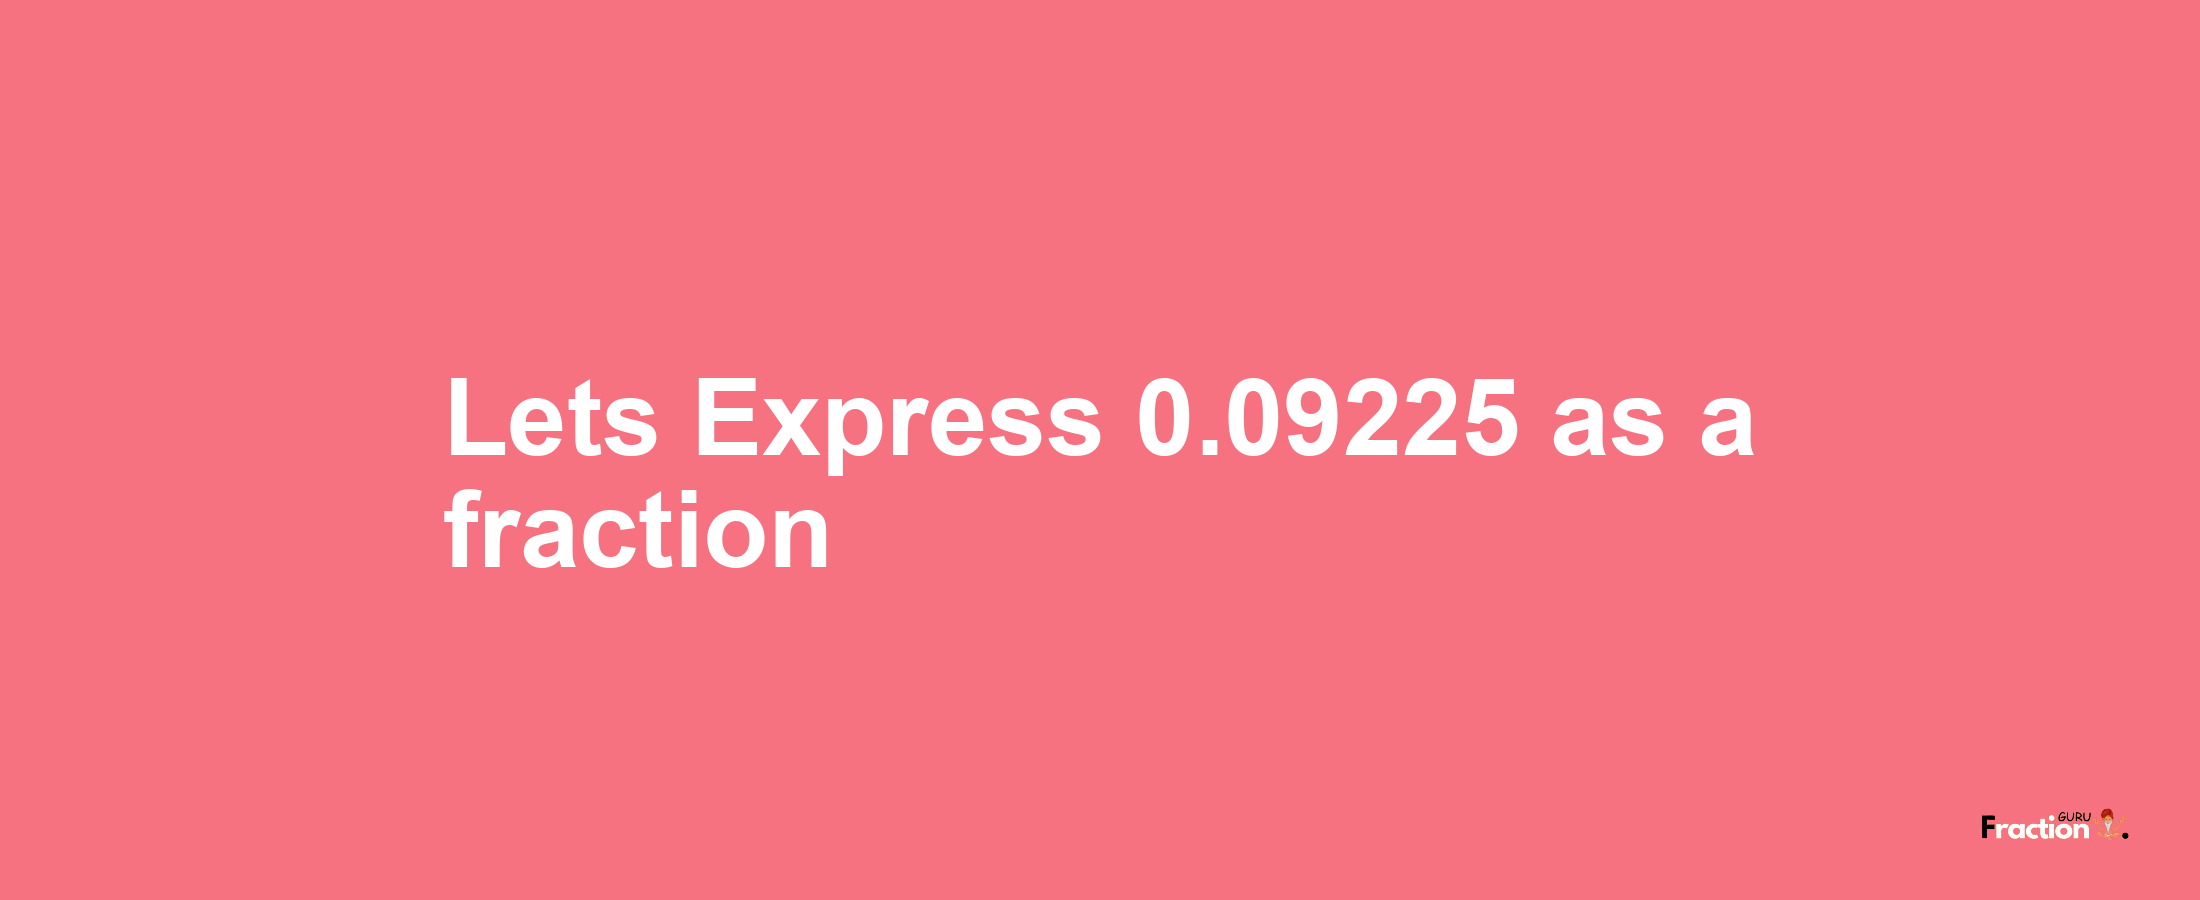 Lets Express 0.09225 as afraction